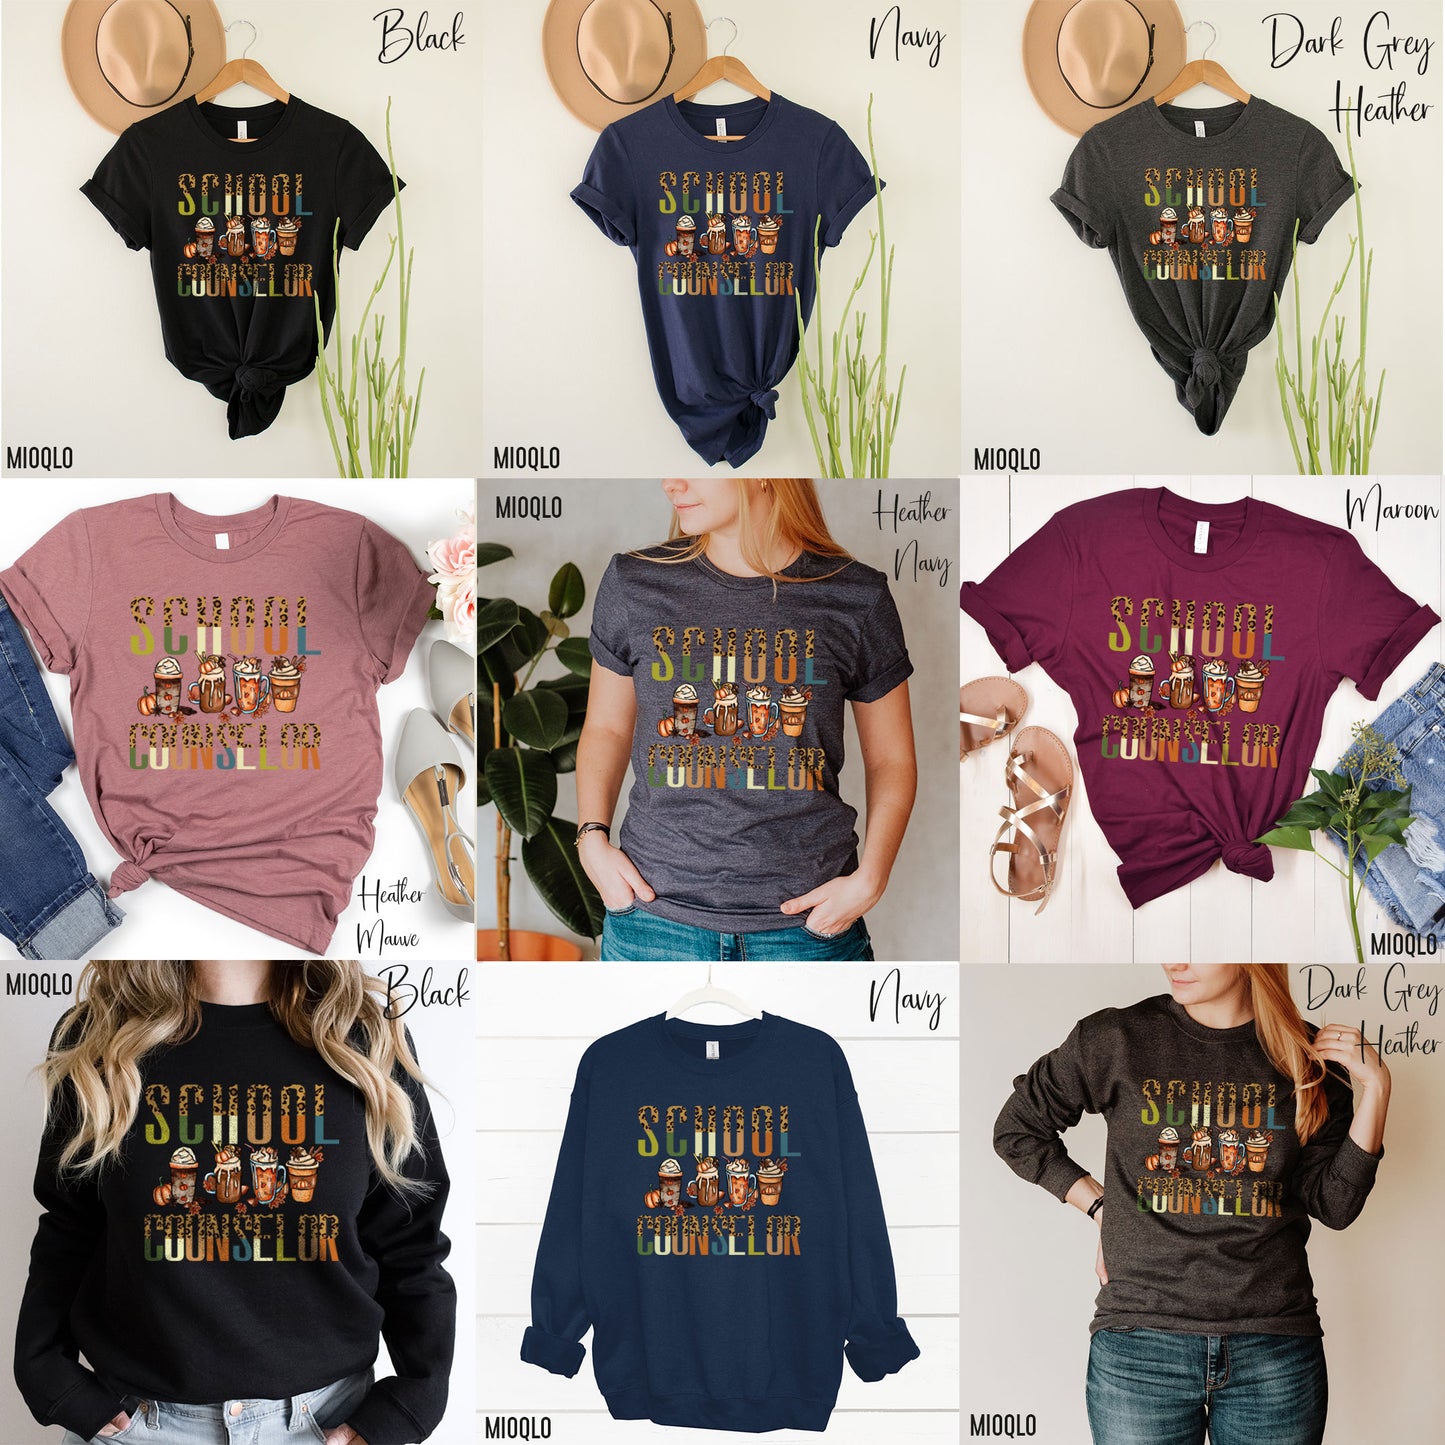 School Counselor Shirt for Women, Counselor Pumpkin Shirt, Back To School Counseling, Gift for School Counselor, Advisor Therapy Sweatshirt